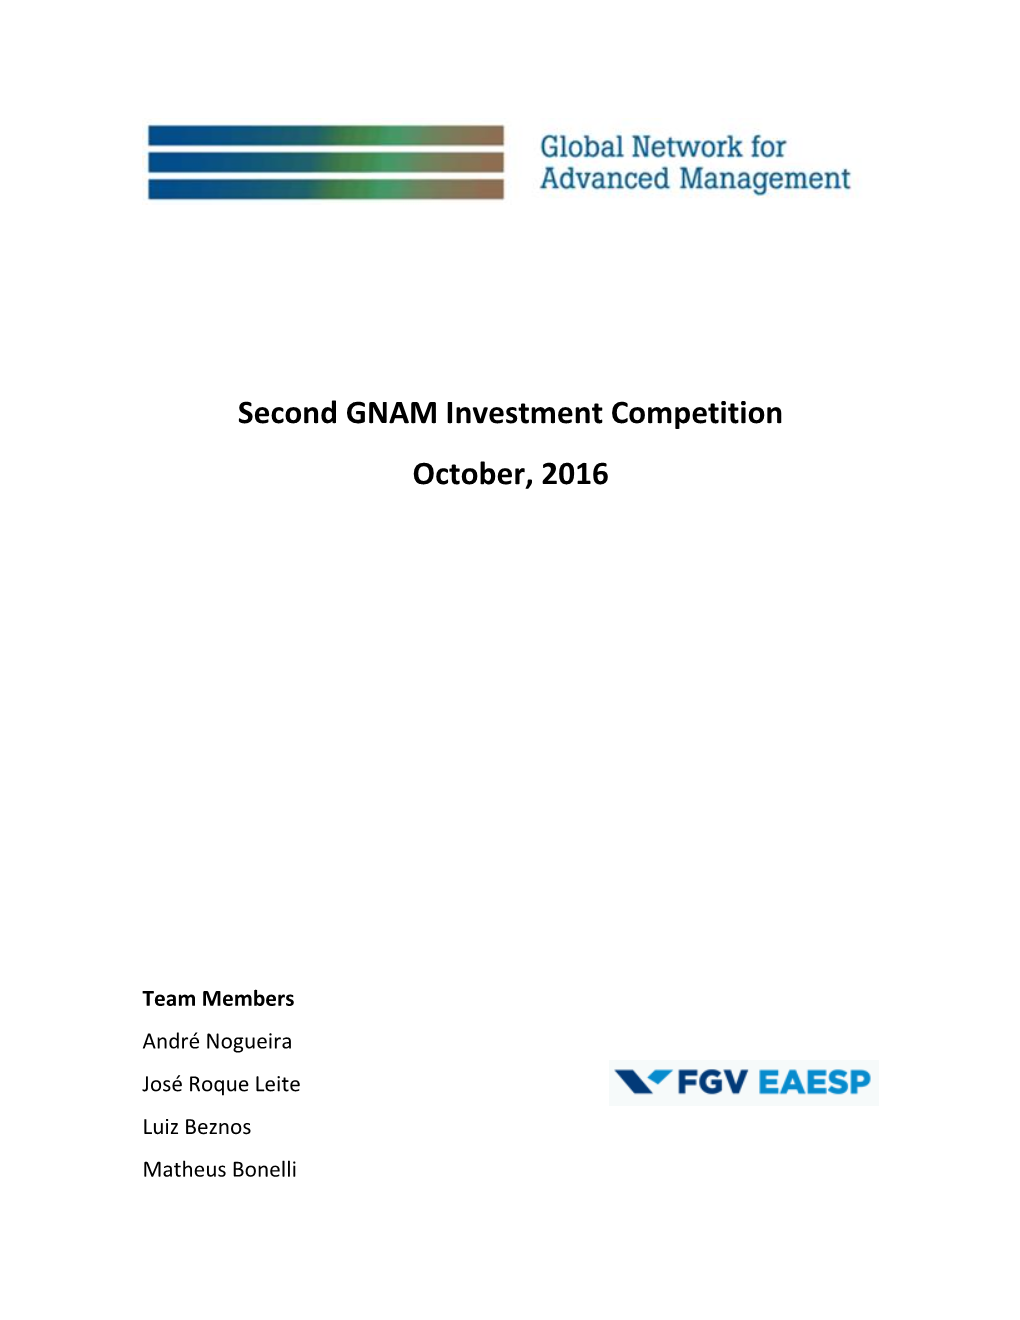 Second GNAM Investment Competition October, 2016